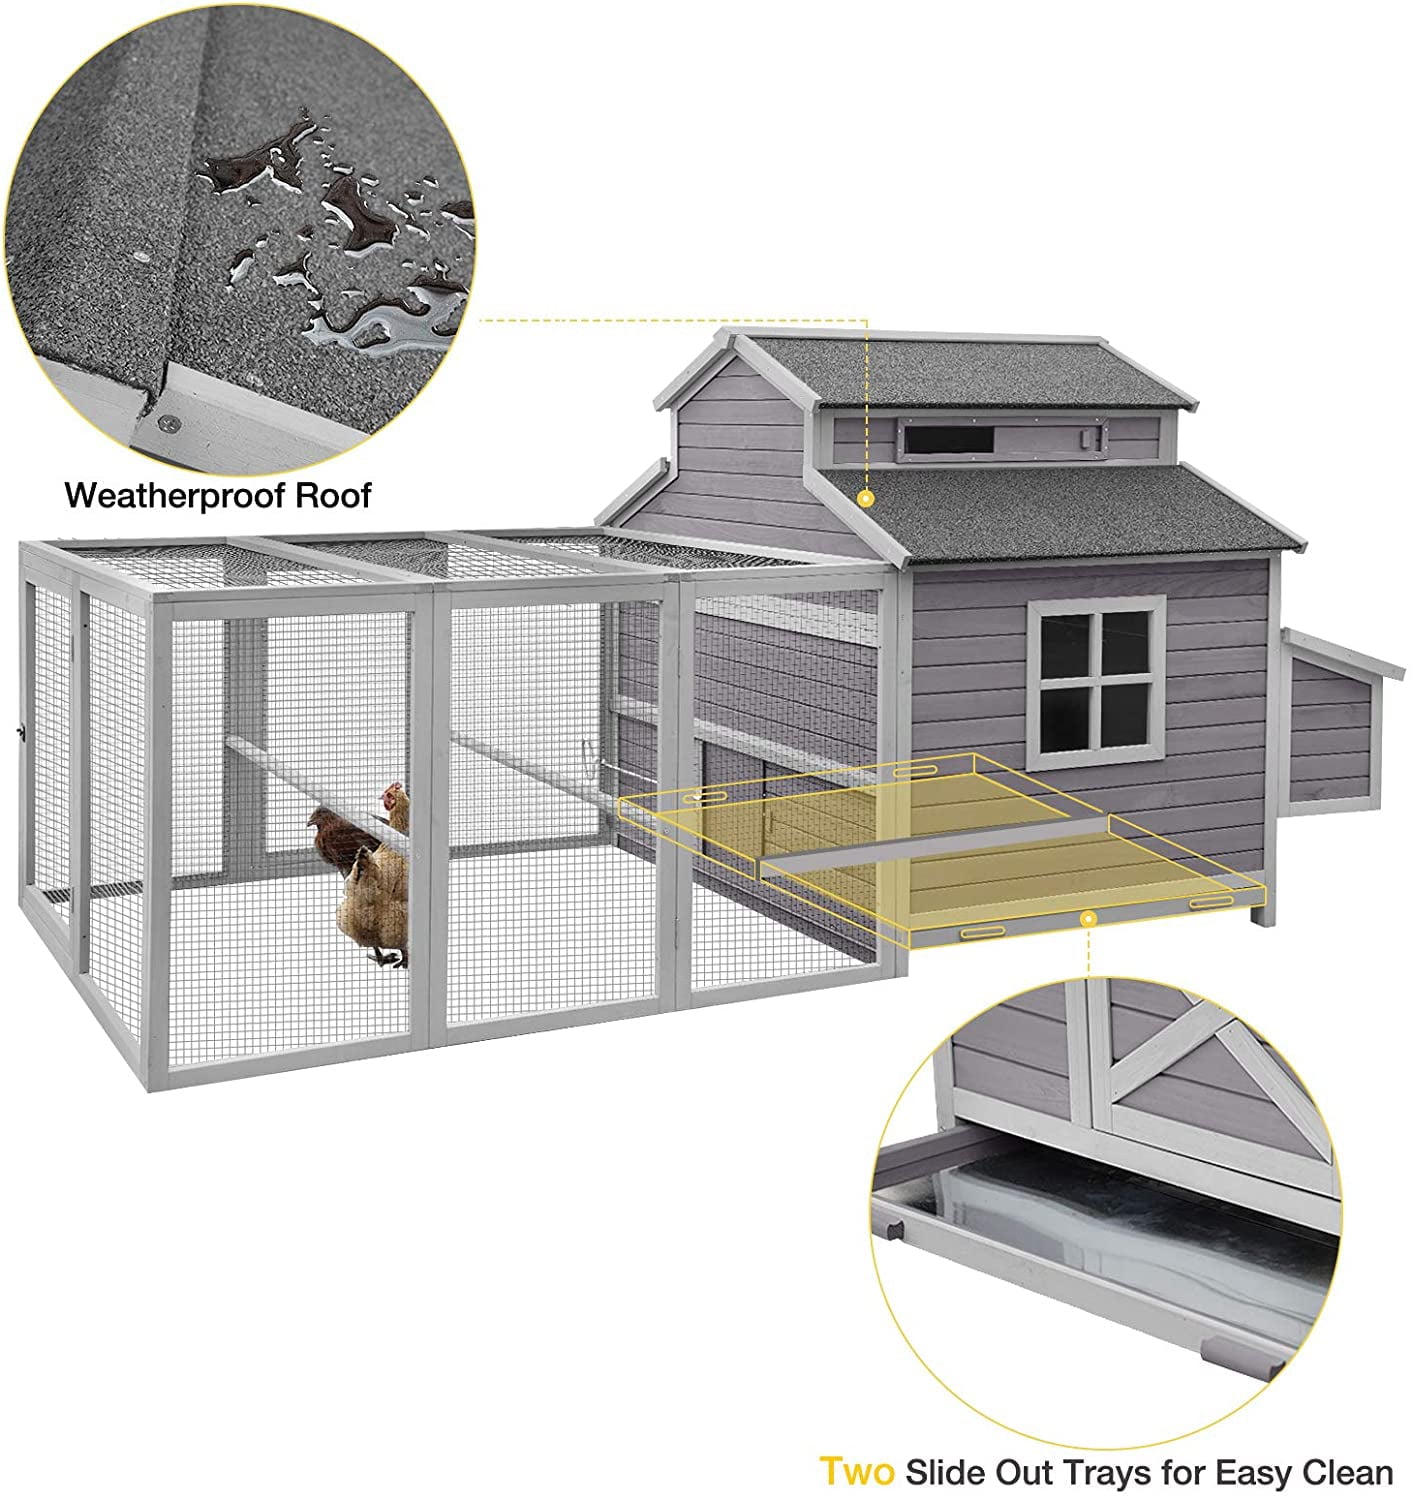 Morgete Extra Large Chicken Coop Wooden Hen House for 8-10 Chickens